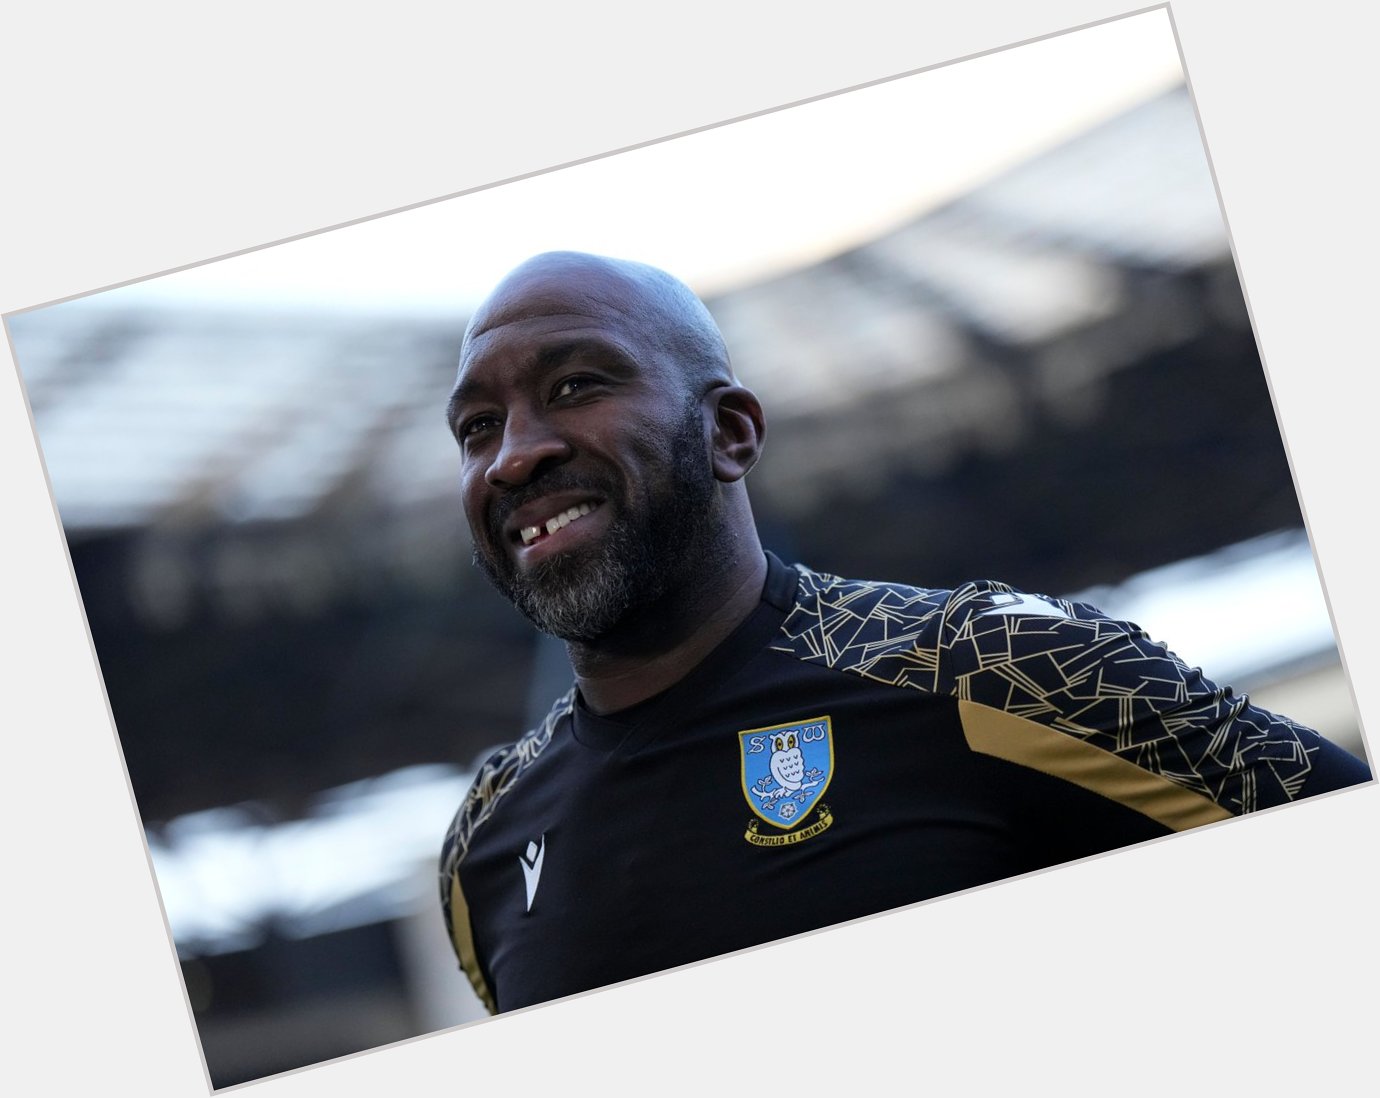          !

Happy birthday to our manager Darren Moore  